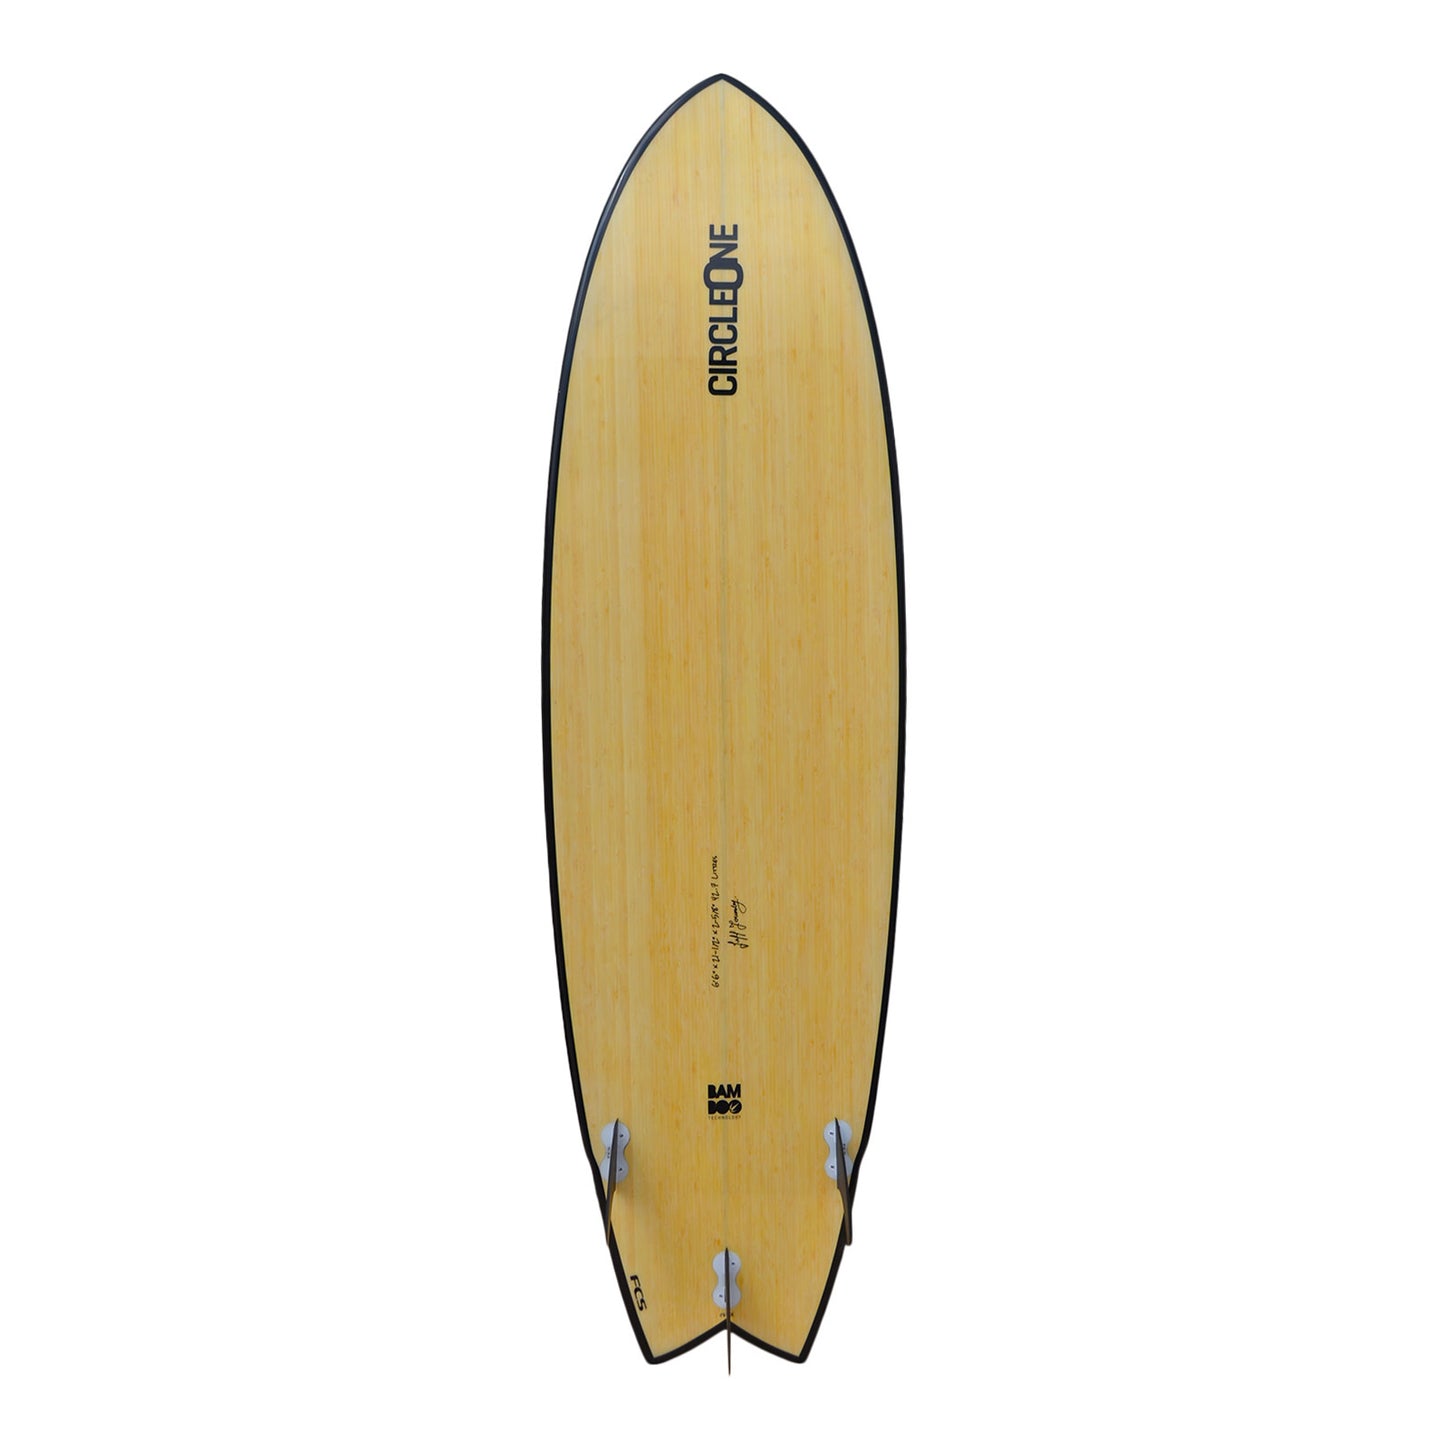 6′ 6″ Bamboo Wing Swallow Tail Surfboard Package – Includes Bag, Leash, Fins & Wax